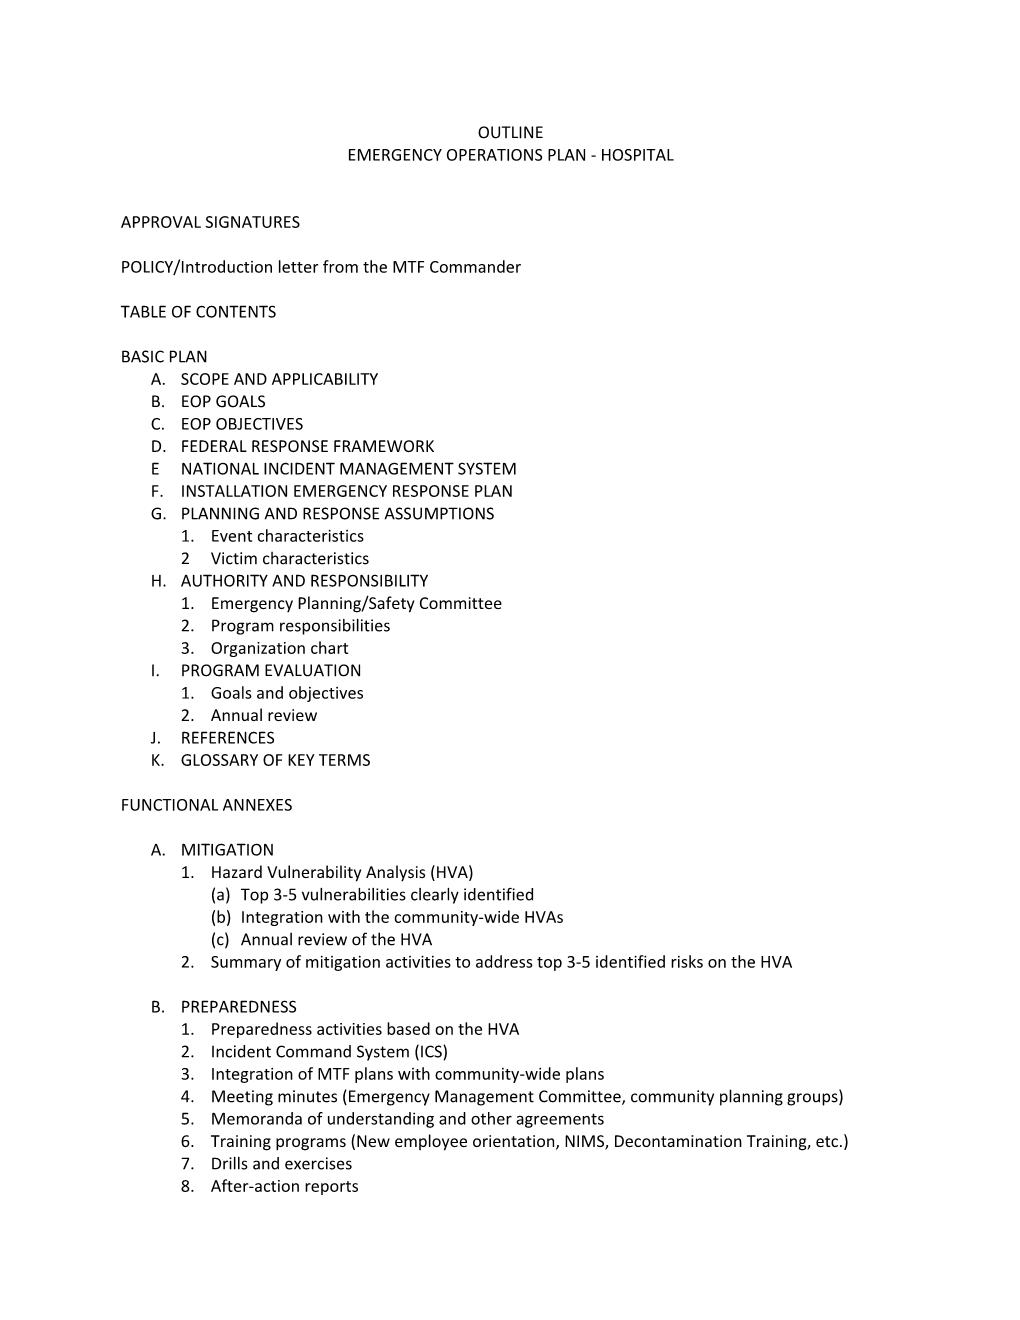 Medical Safety Template- EOP Outline 2010